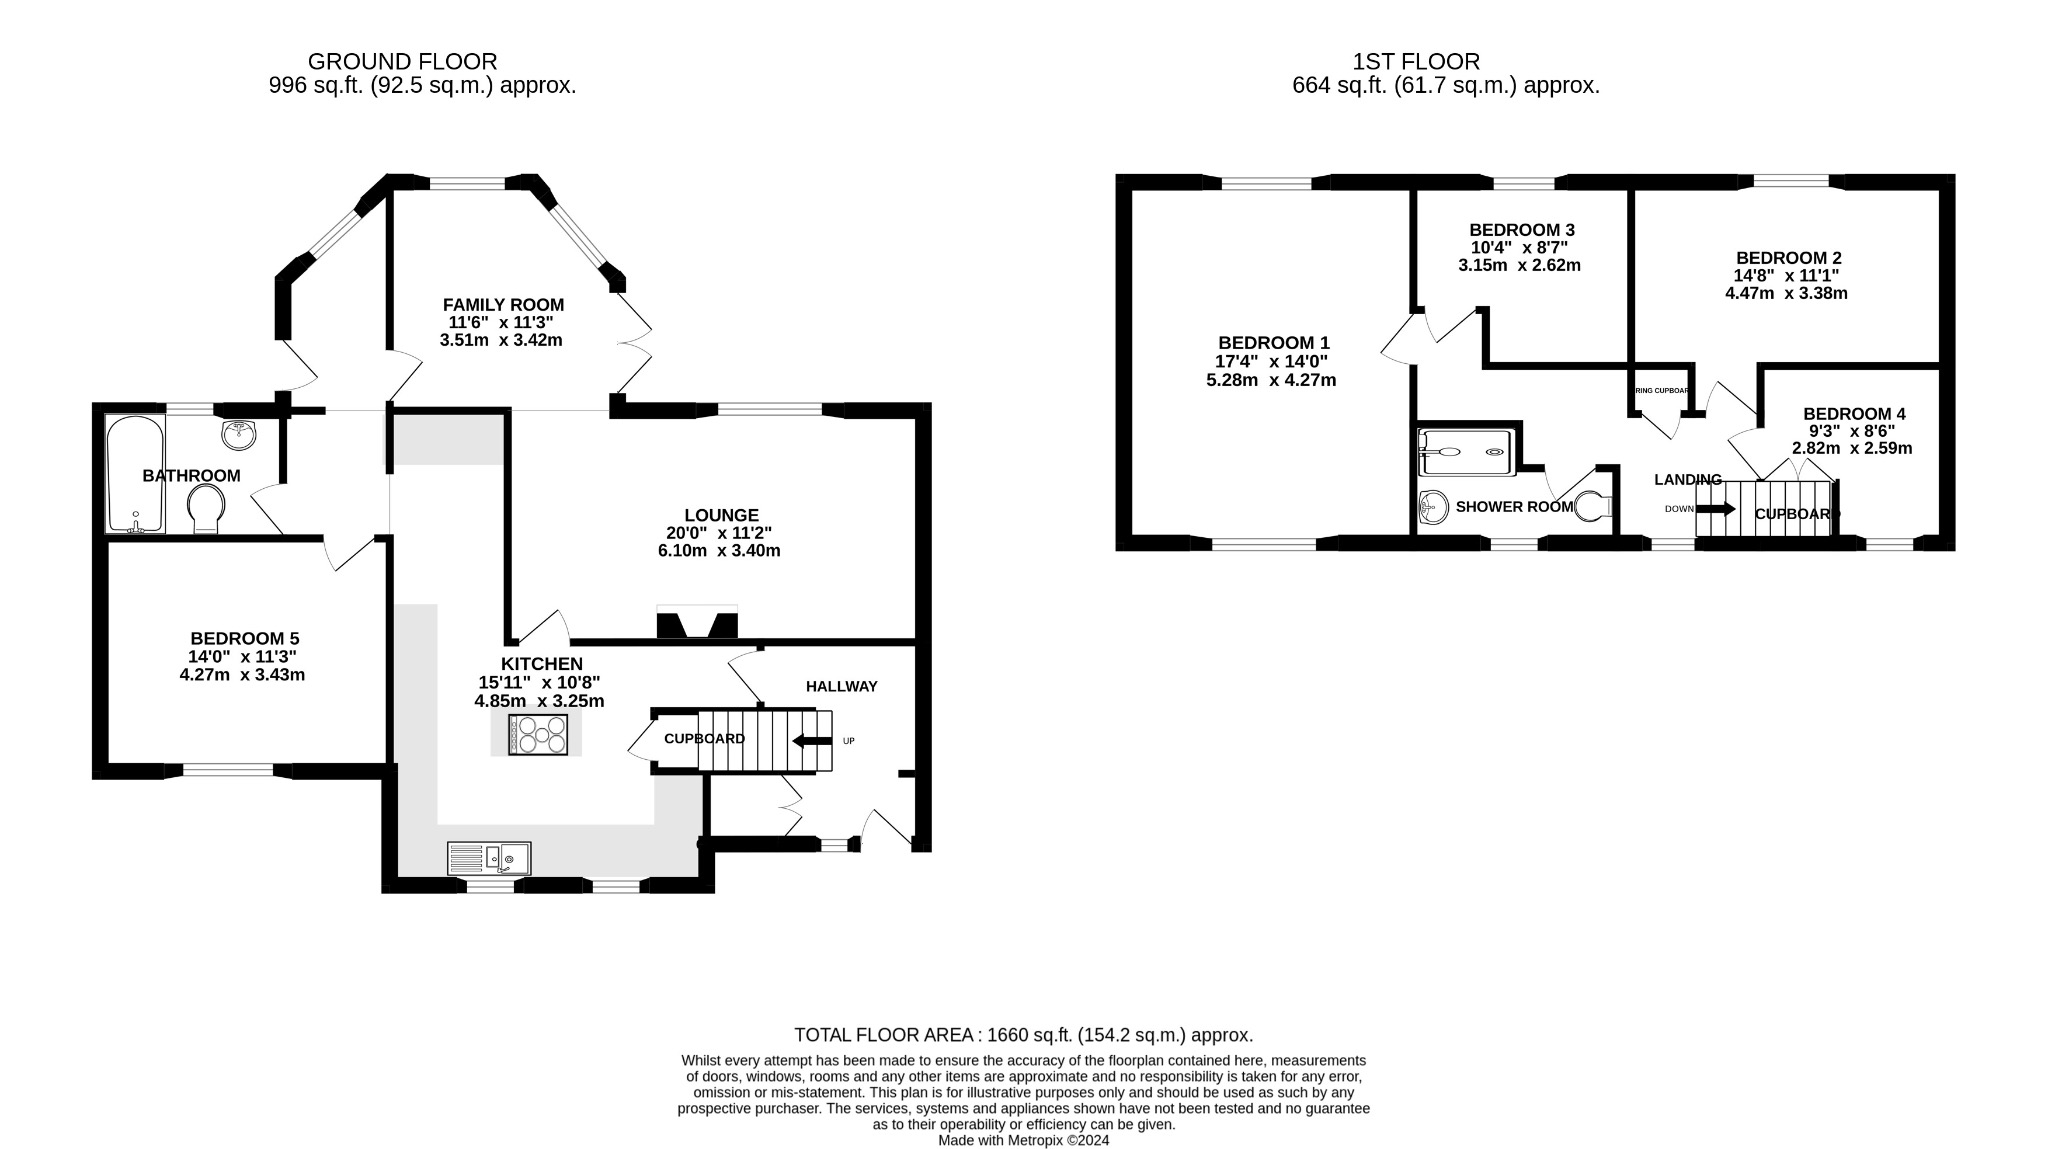 5 bed semi-detached house for sale - Property floorplan